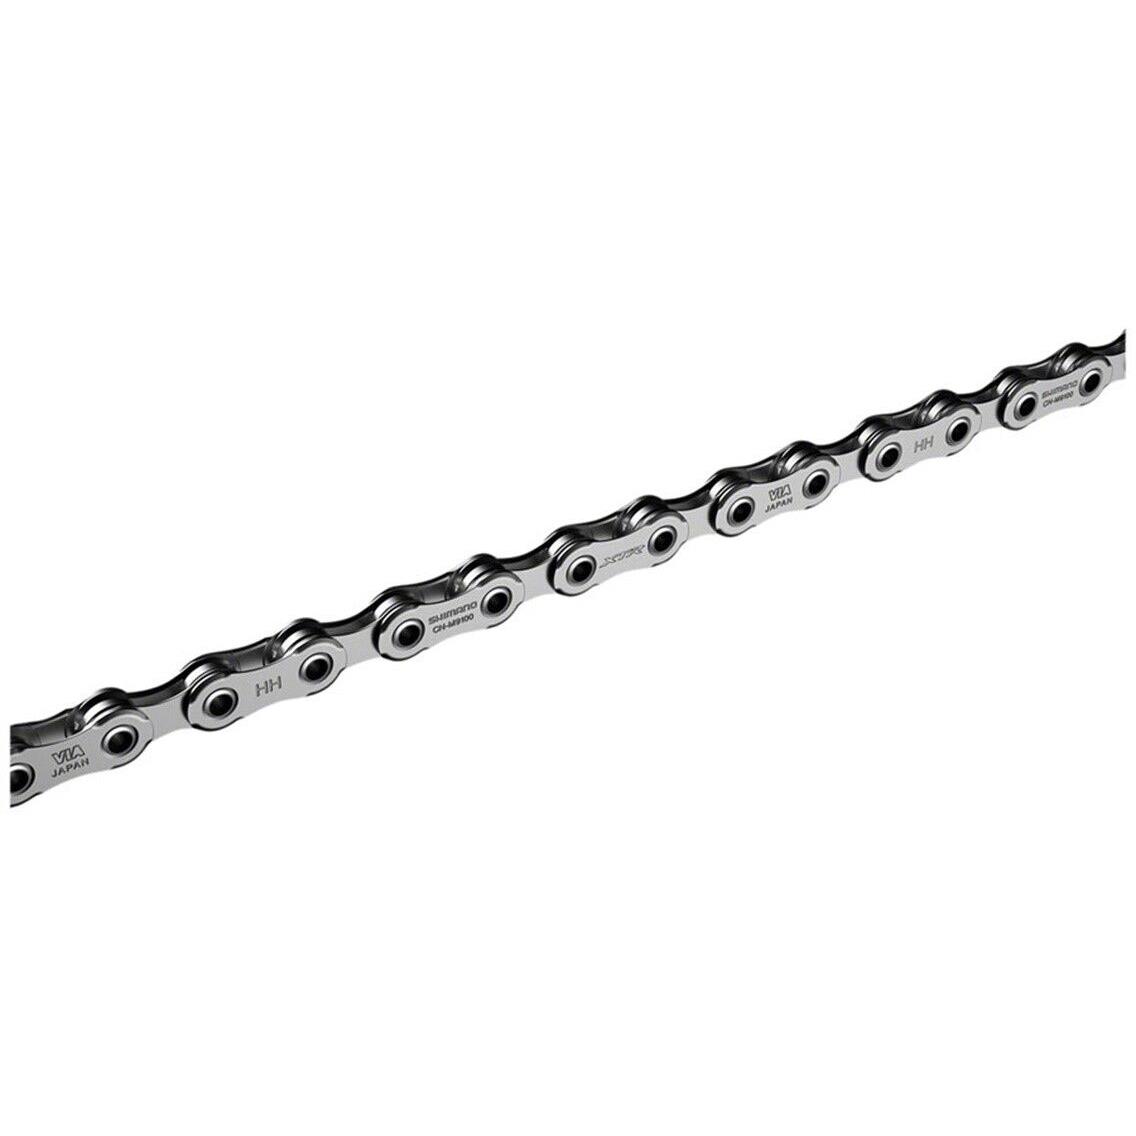 Shimano Xtr CN-M9100 Chain - 12-Speed 126 Links Silver